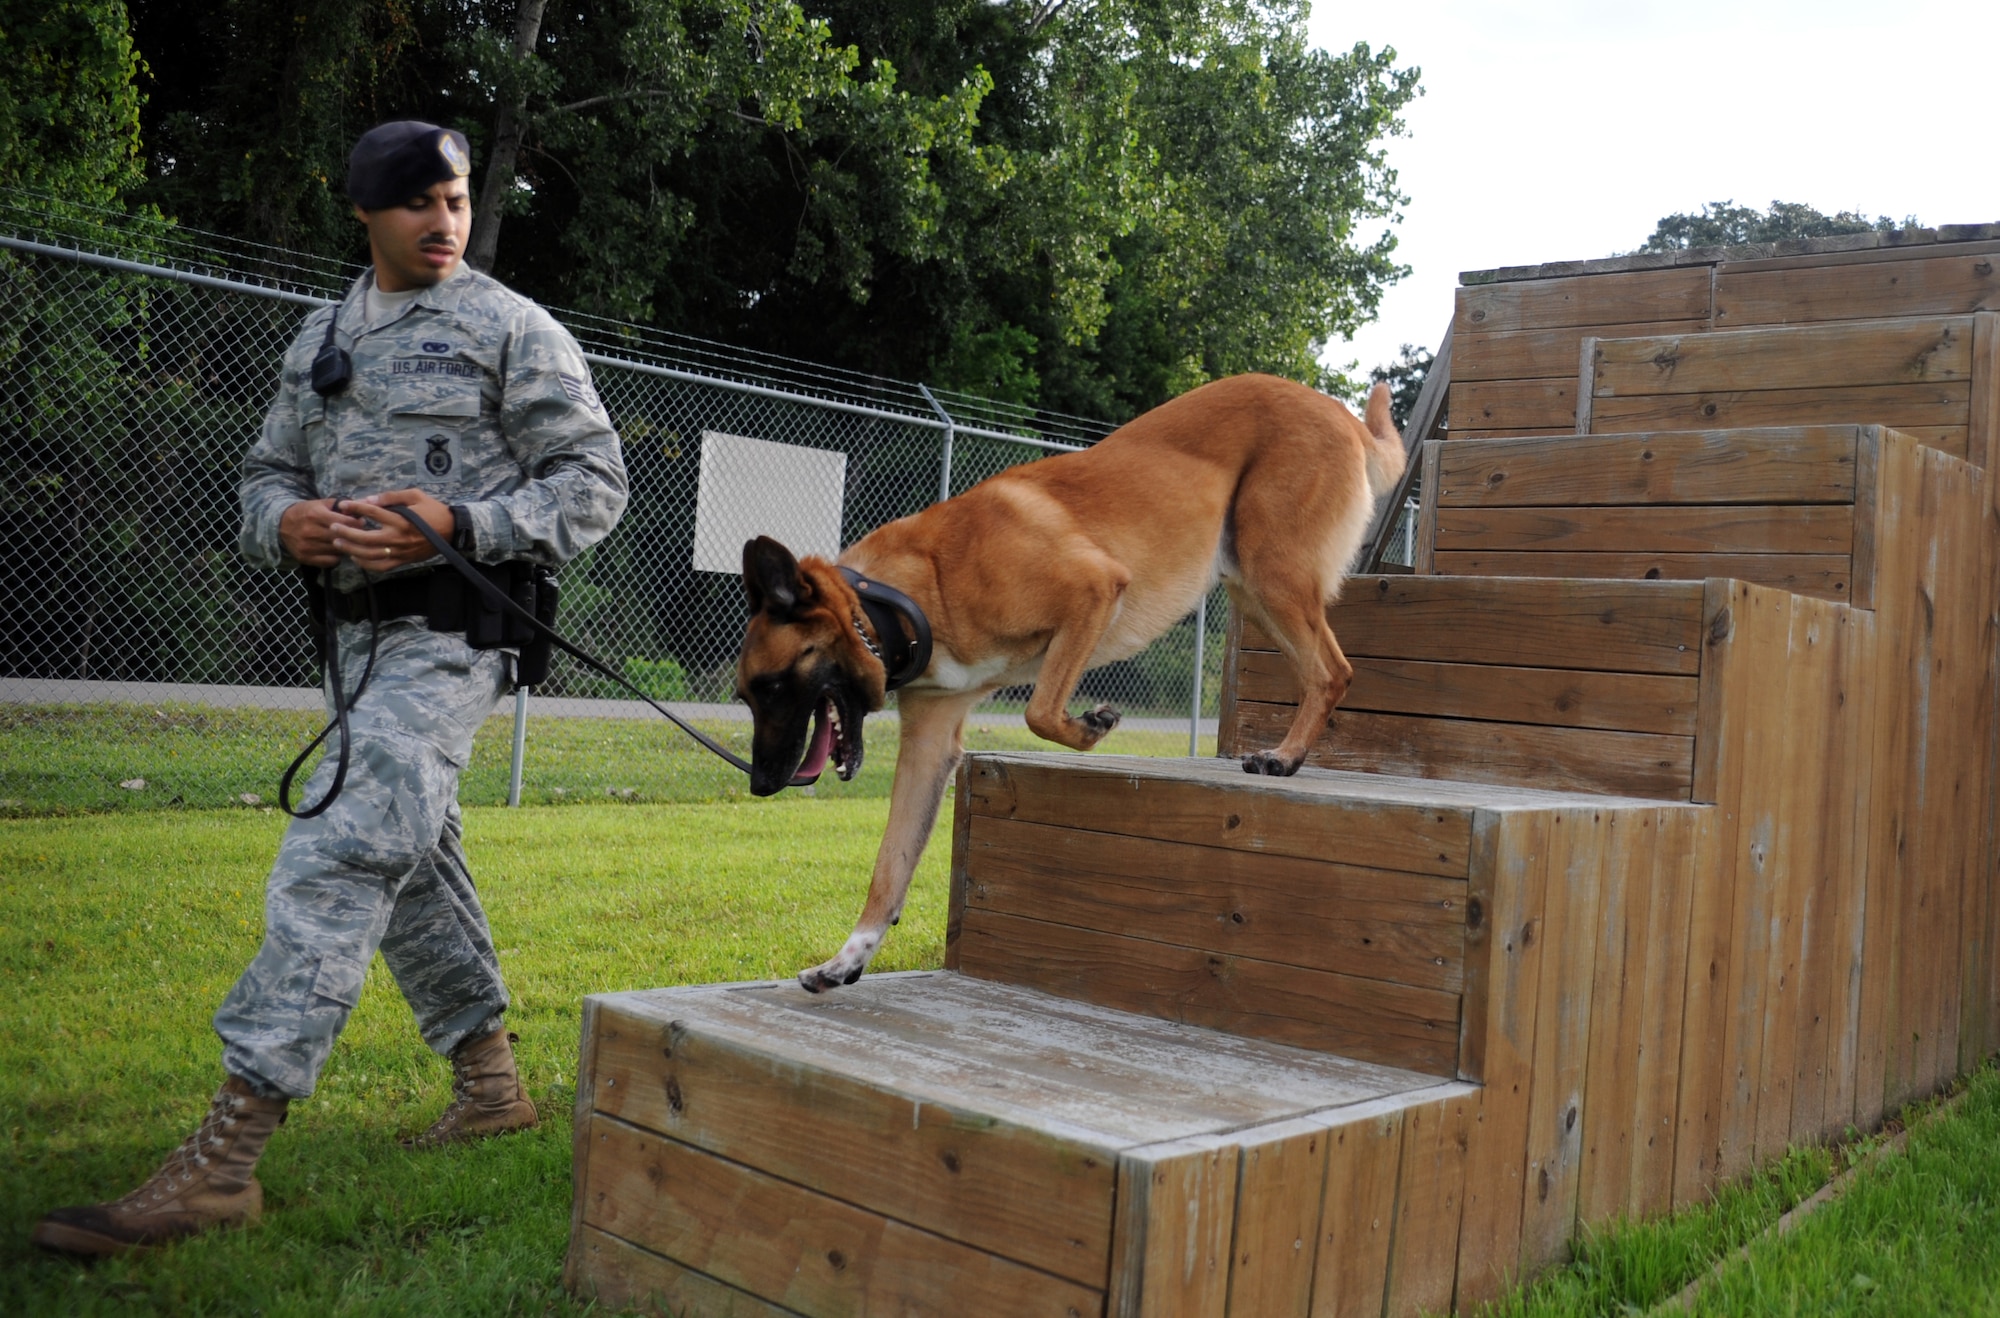 U.S. Air Force Staff Sgt. Munshi and his military working dog Arton run through the obedience obstacle course at the MWD compound Aug. 20, 2010, on Joint Base Charleston, S.C. MWDs are trained to navigate a variety of obstacles they may encounter while on patrol, giving them added flexibility to ensure mission success. Sergeant Munshi is a dog handler with the 628th Security Forces Squadron. (U.S. Air Force photo/Senior Airman Timothy Taylor)